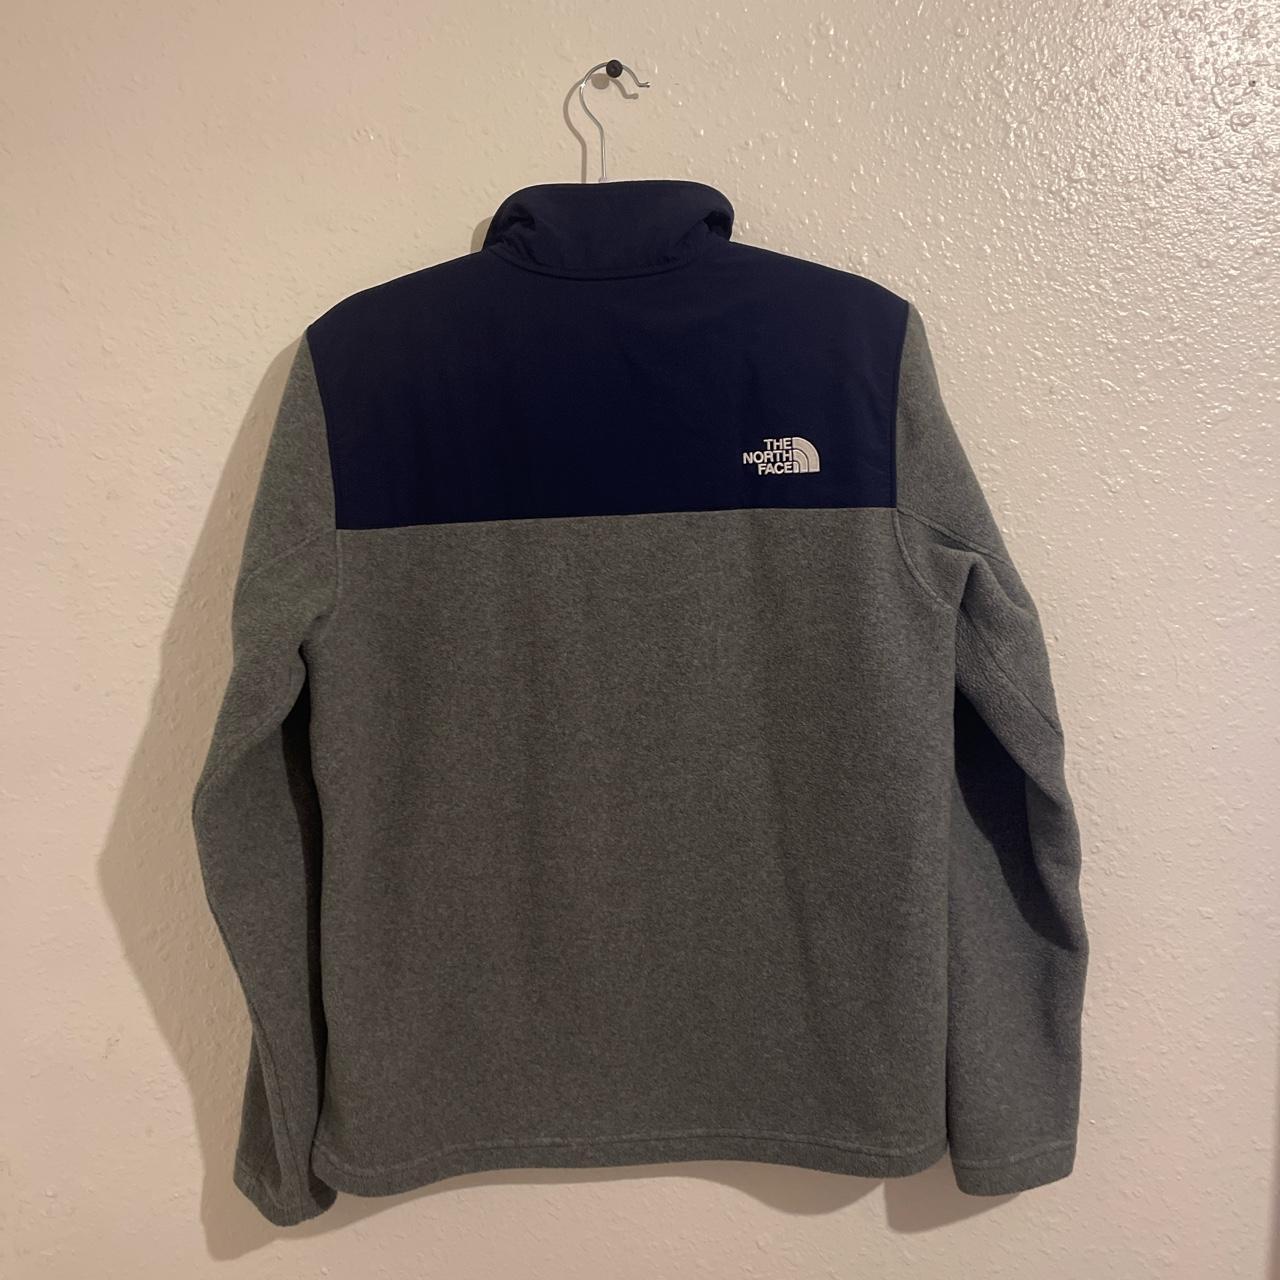 The North Face Men's Navy and Grey Jacket (4)